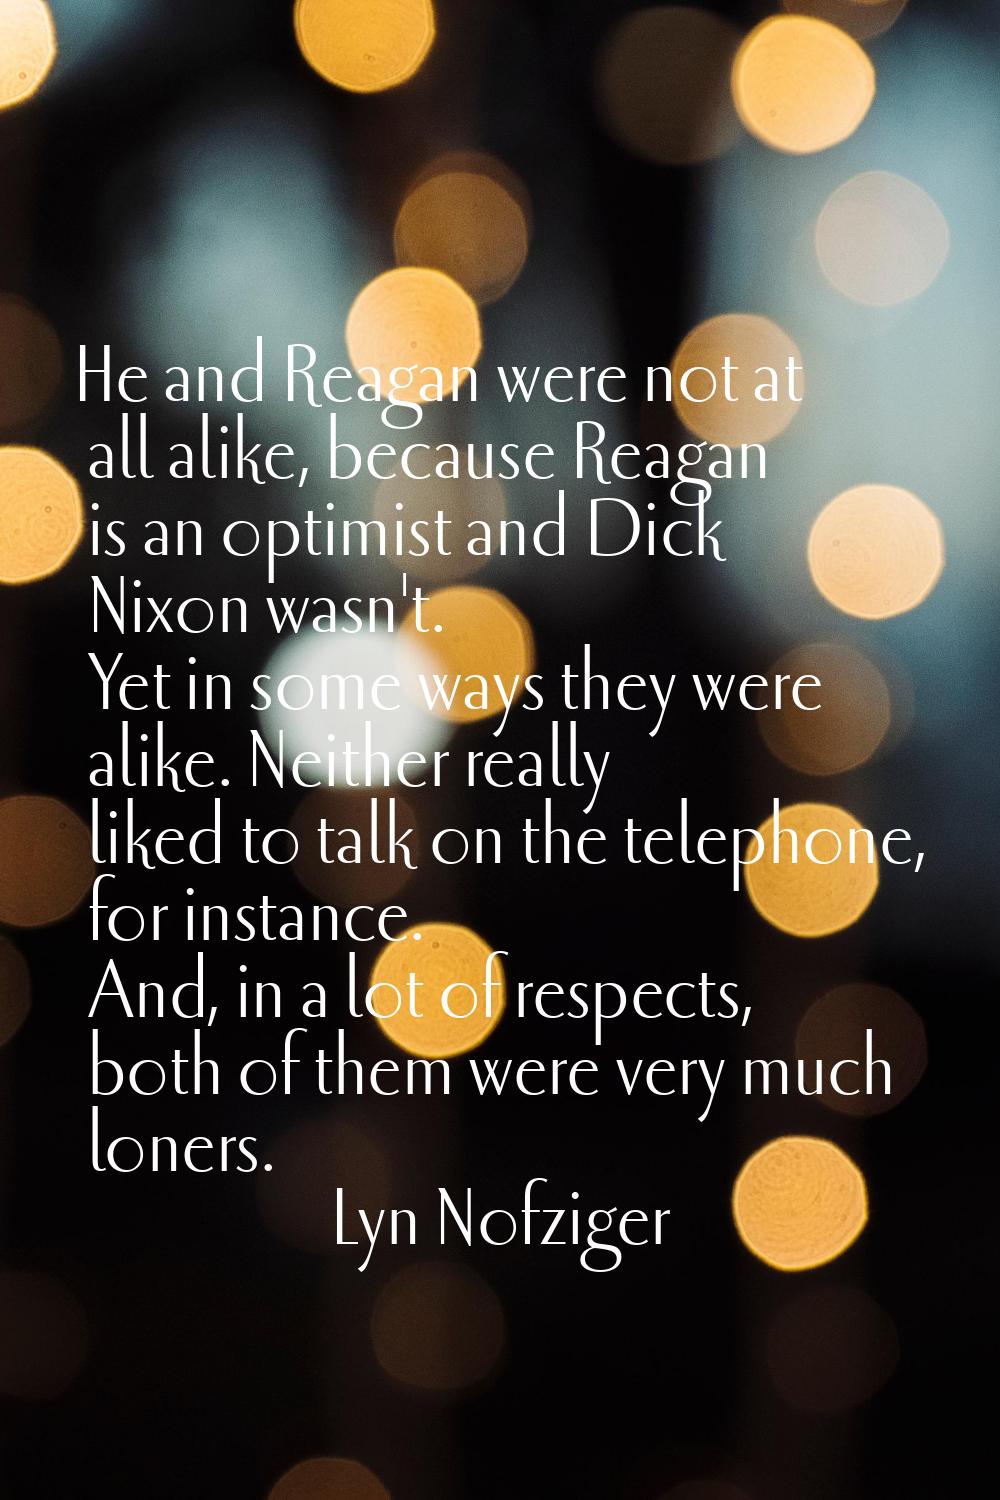 He and Reagan were not at all alike, because Reagan is an optimist and Dick Nixon wasn't. Yet in so